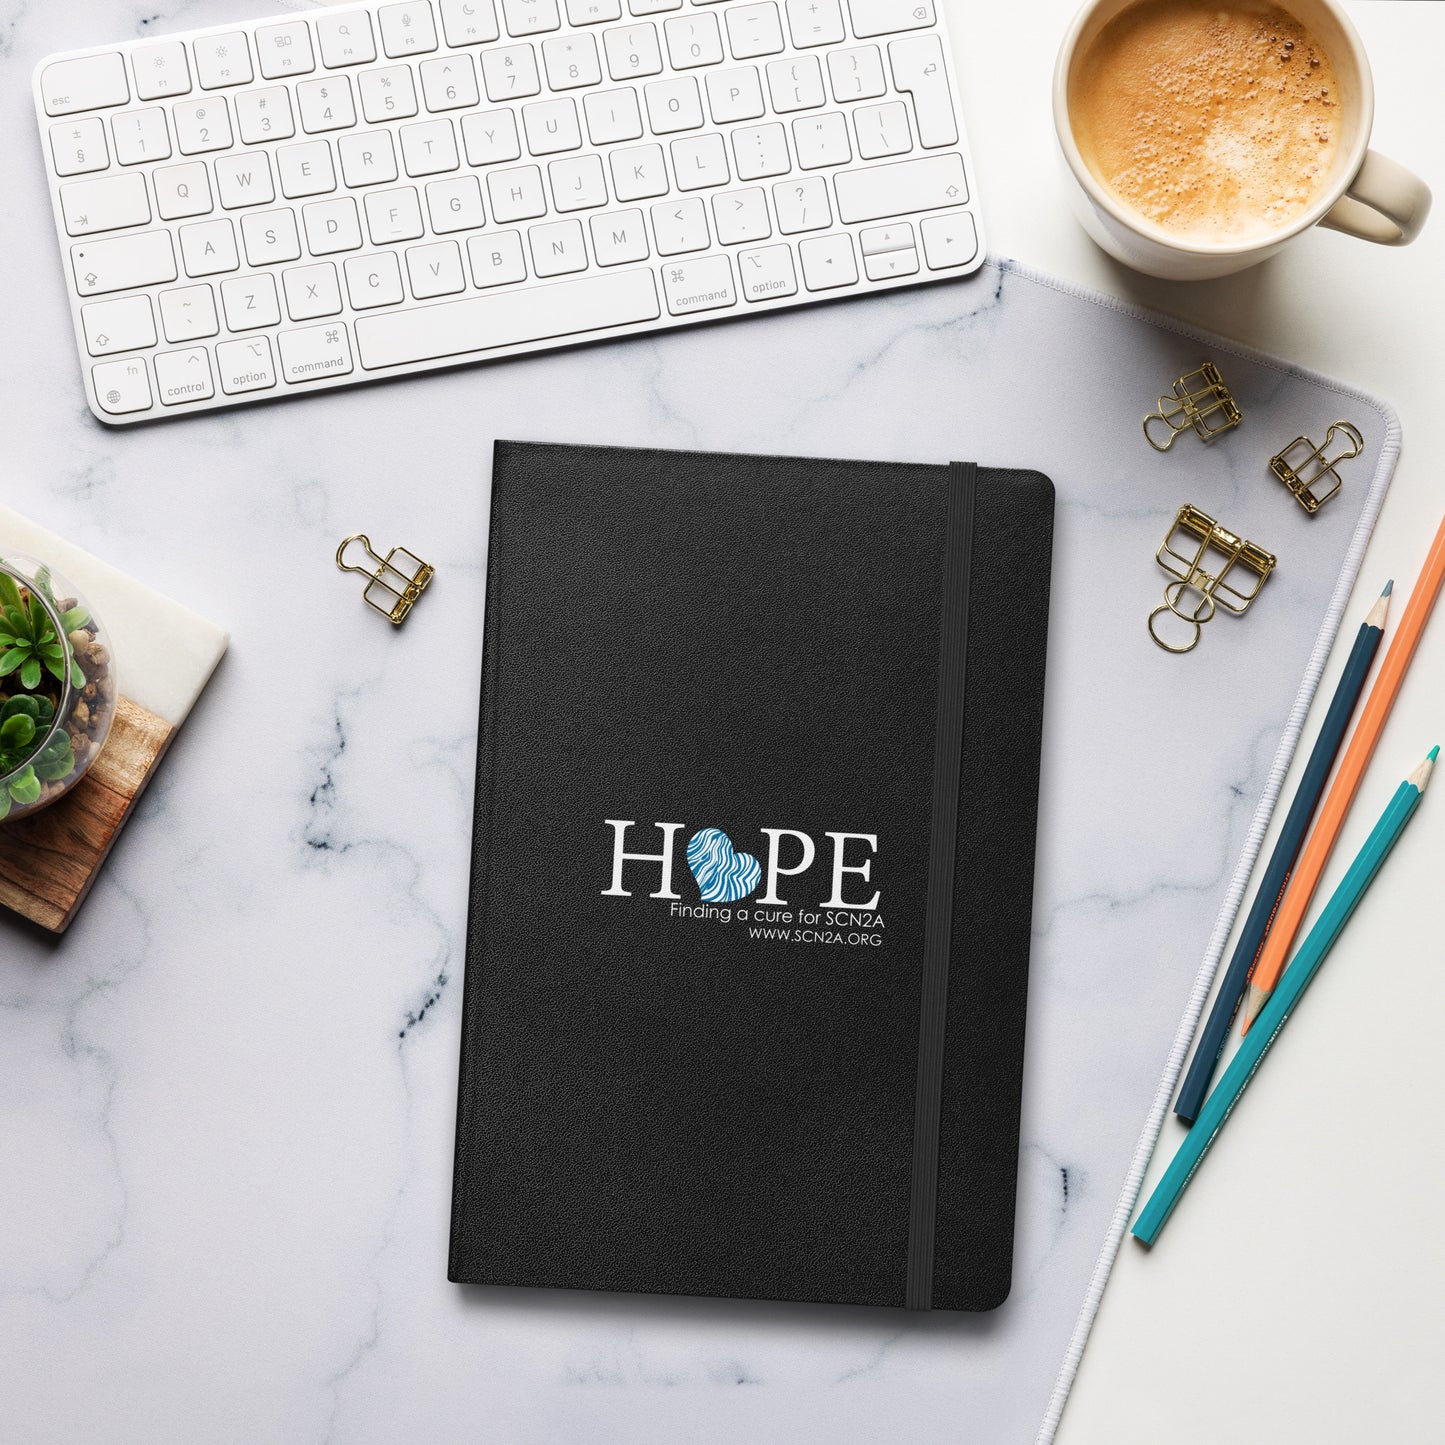 HOPE w/ blue heart Hardcover bound notebook